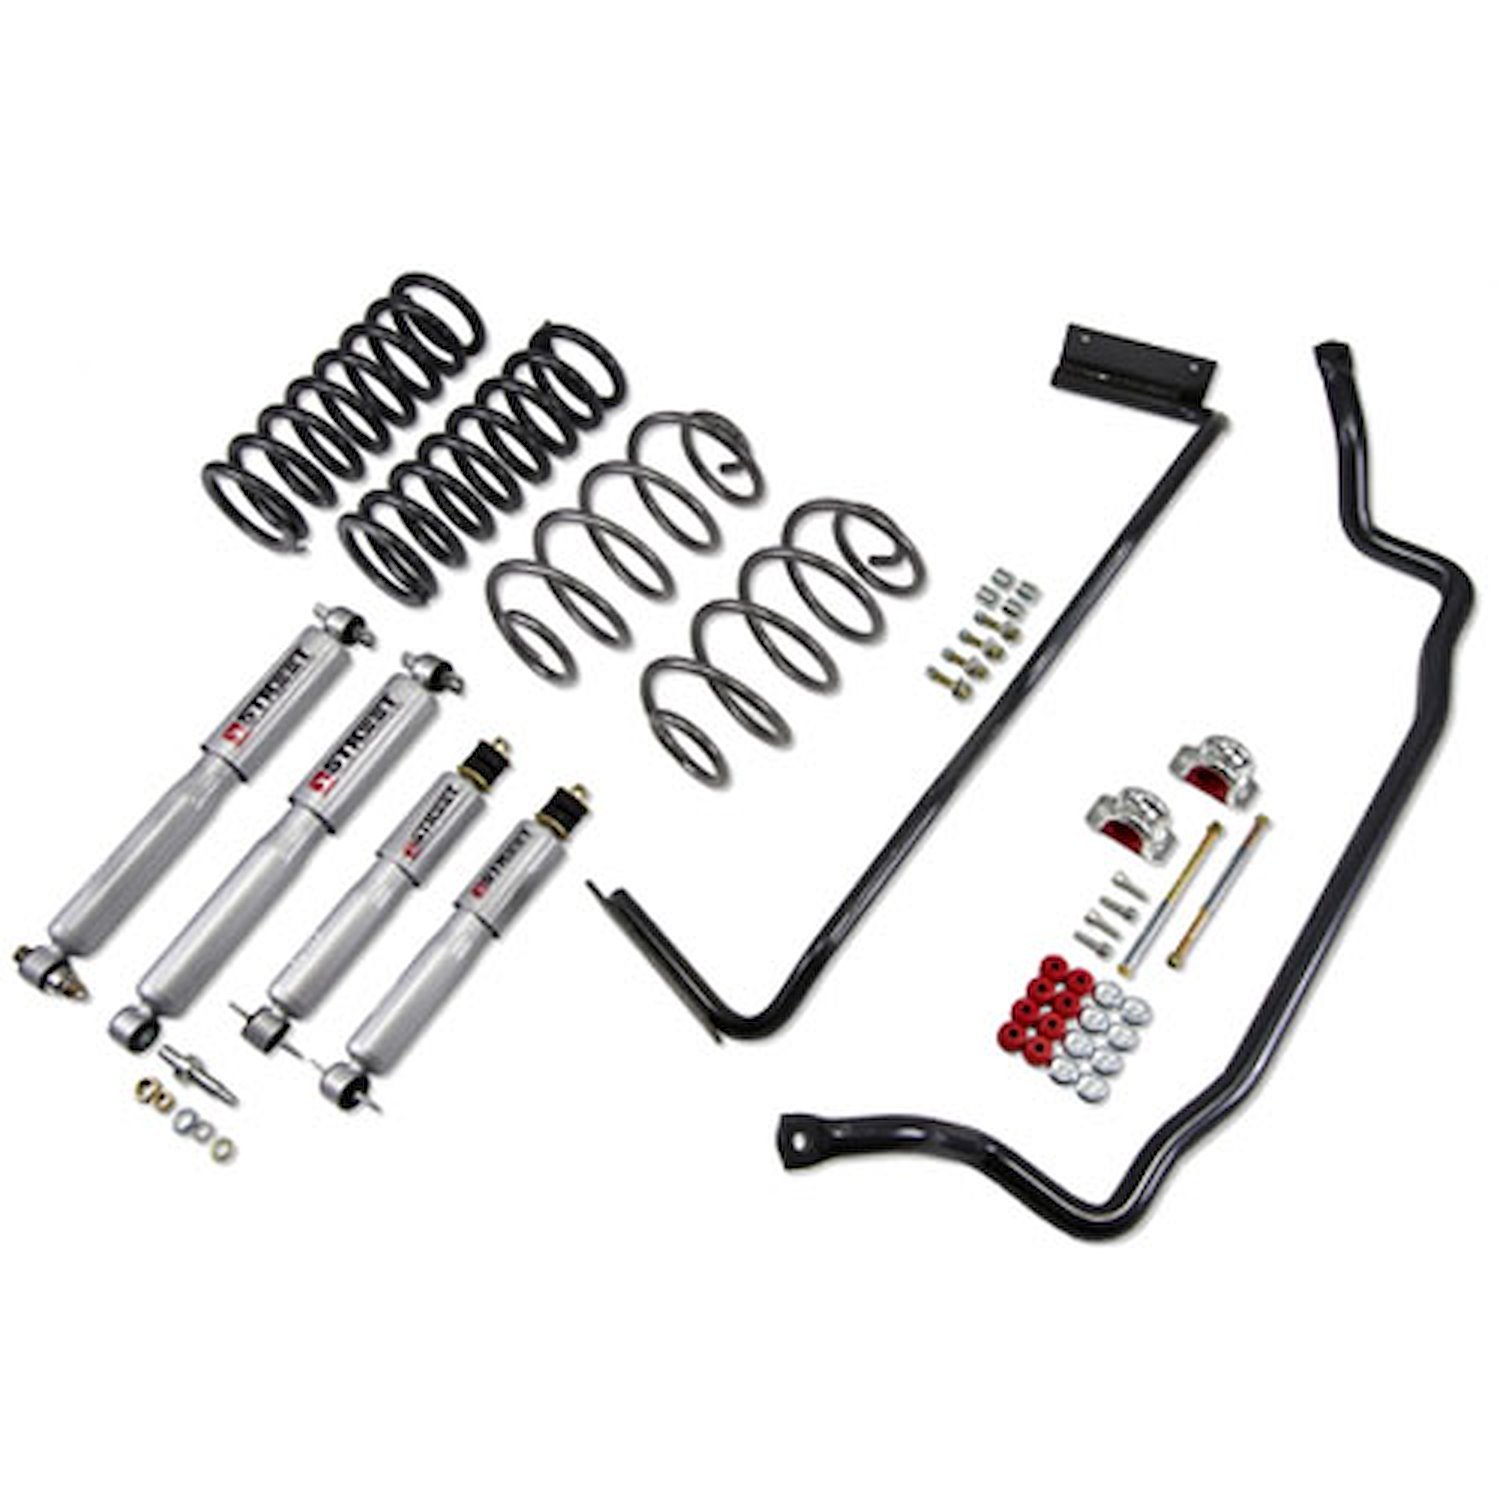 Muscle Car Suspension Kit for 1978-1987 GM G-Body